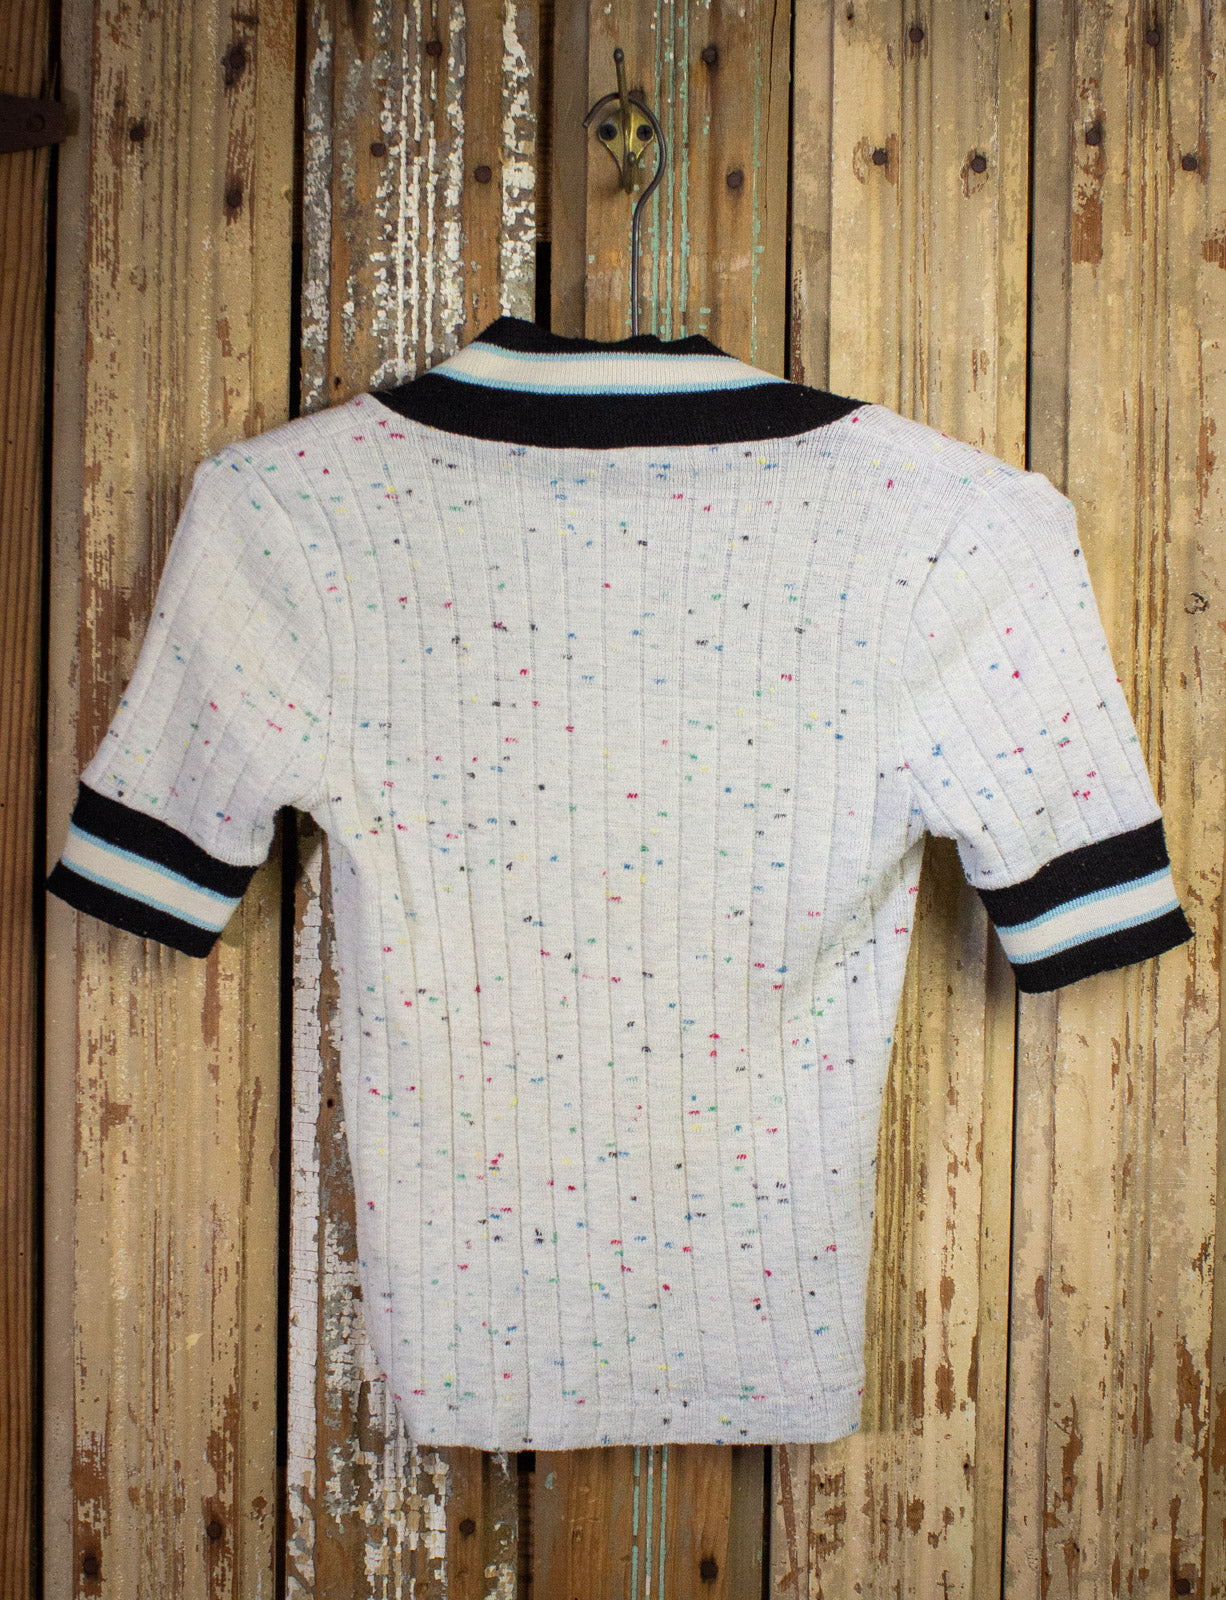 Vintage Women's Dotted Top 70s White XS